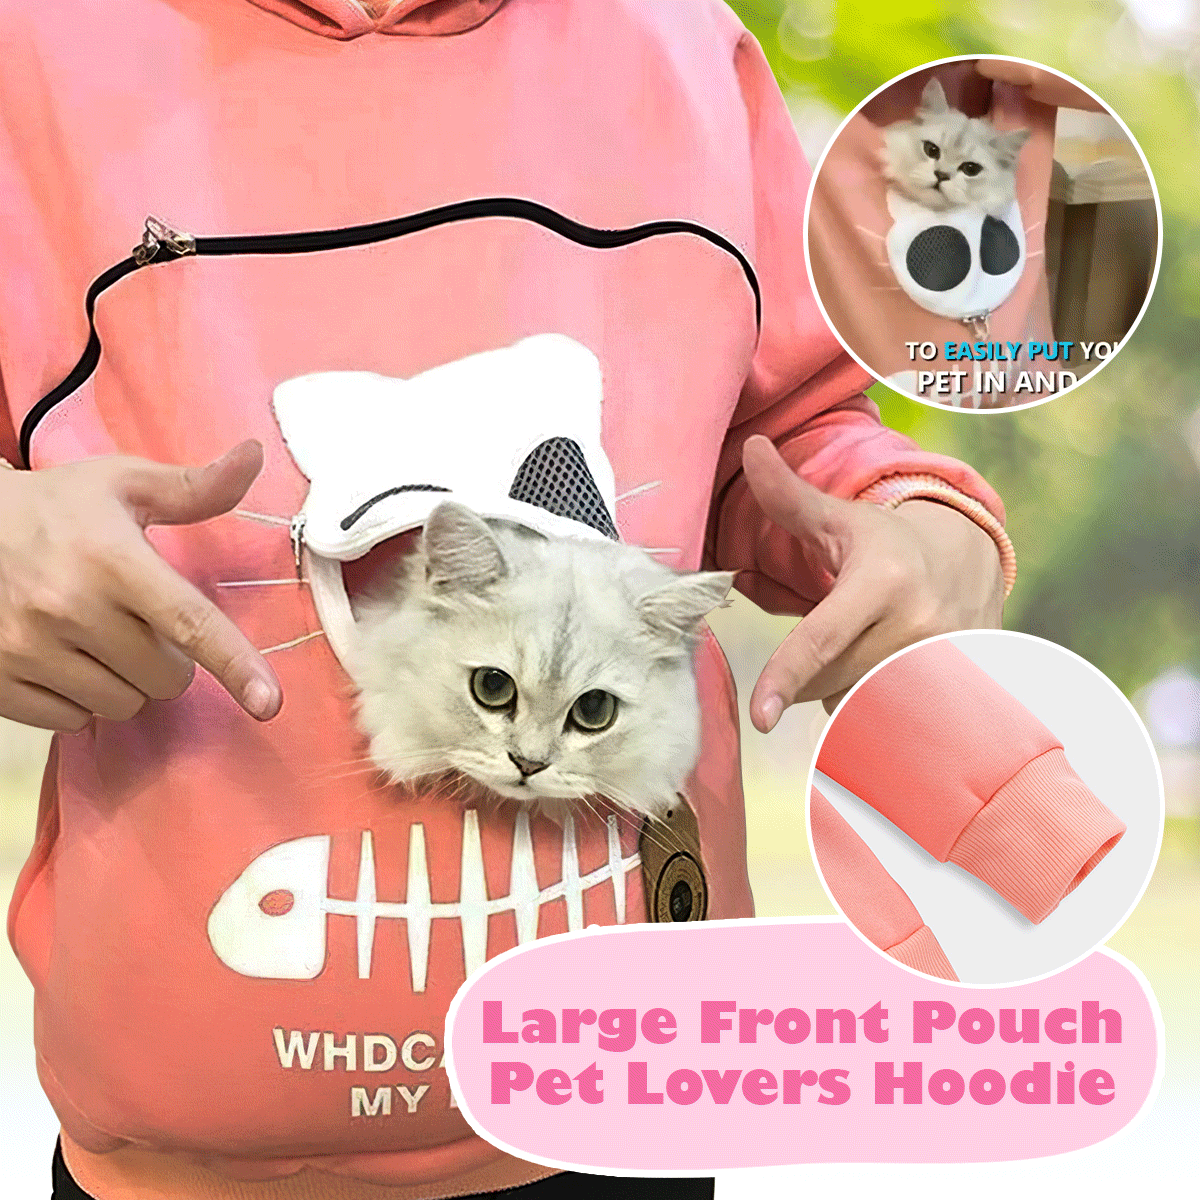 Large Front Pouch Pet Lovers Hoodie